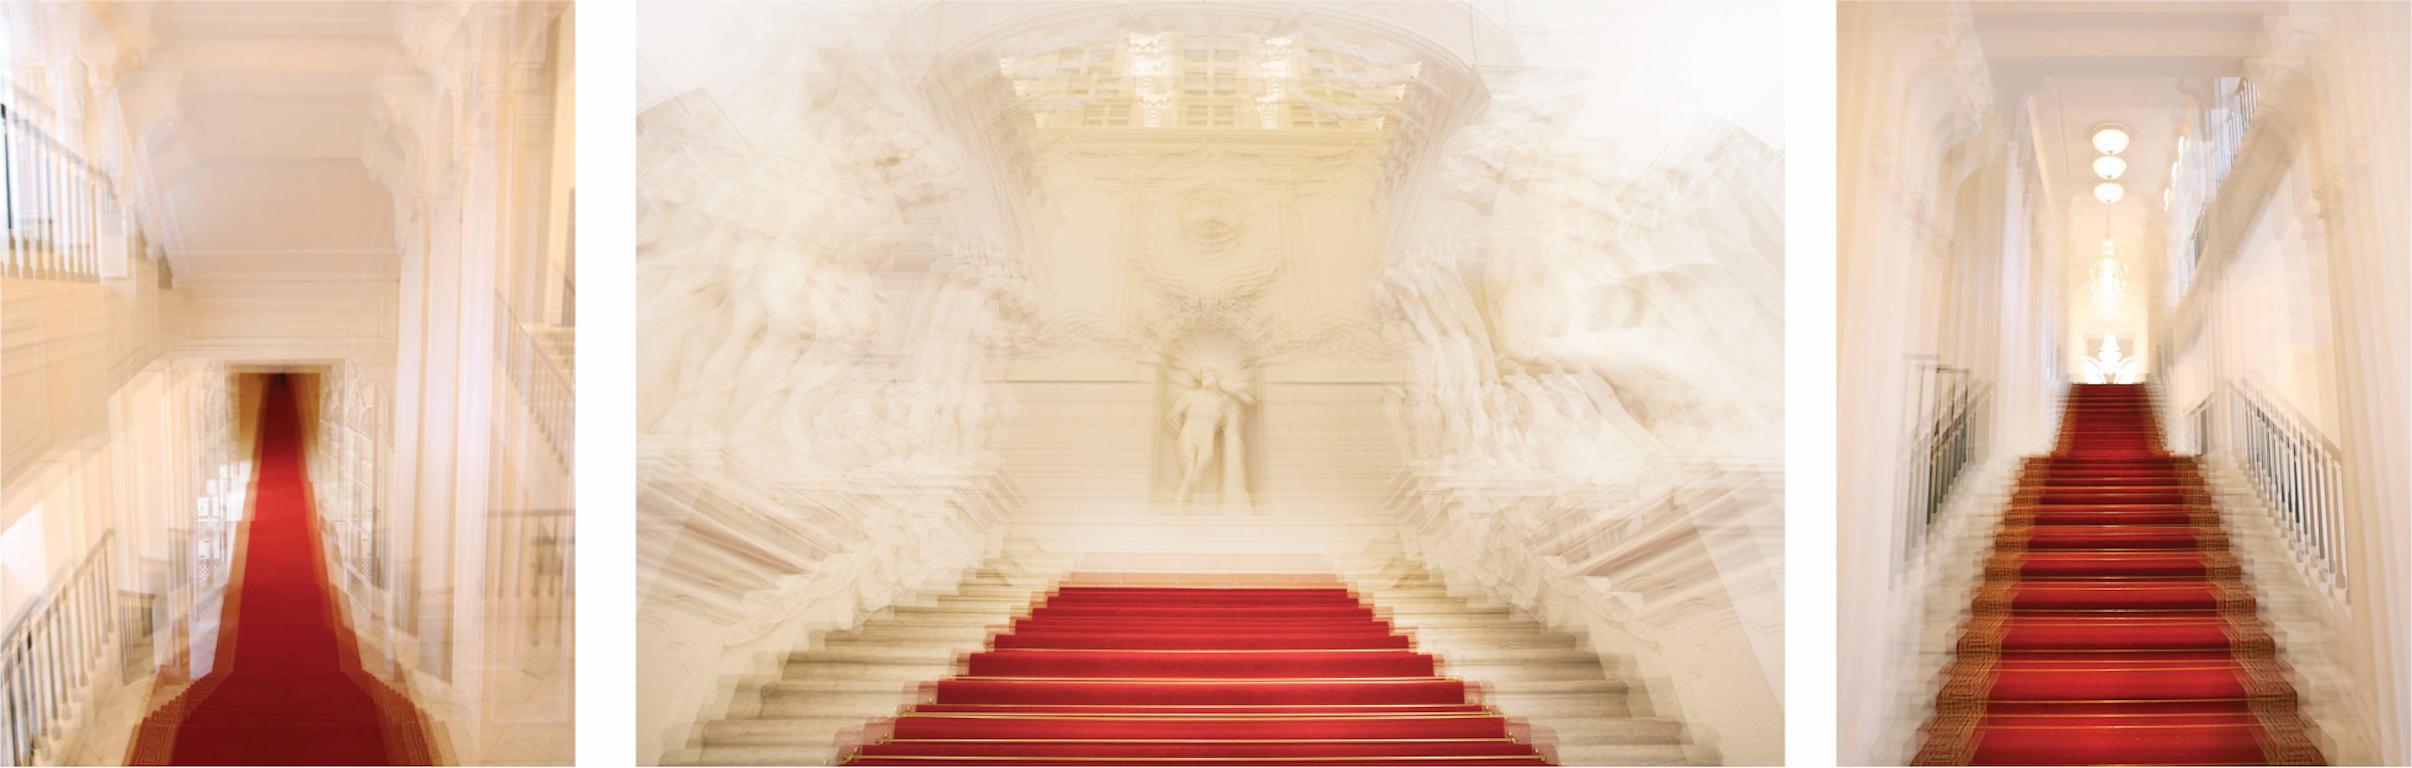 Magda Von Hanau Color Photograph - Albertina Palace Downstairs, Up Stairs & Belvedere Winter Palace. Triptych. 